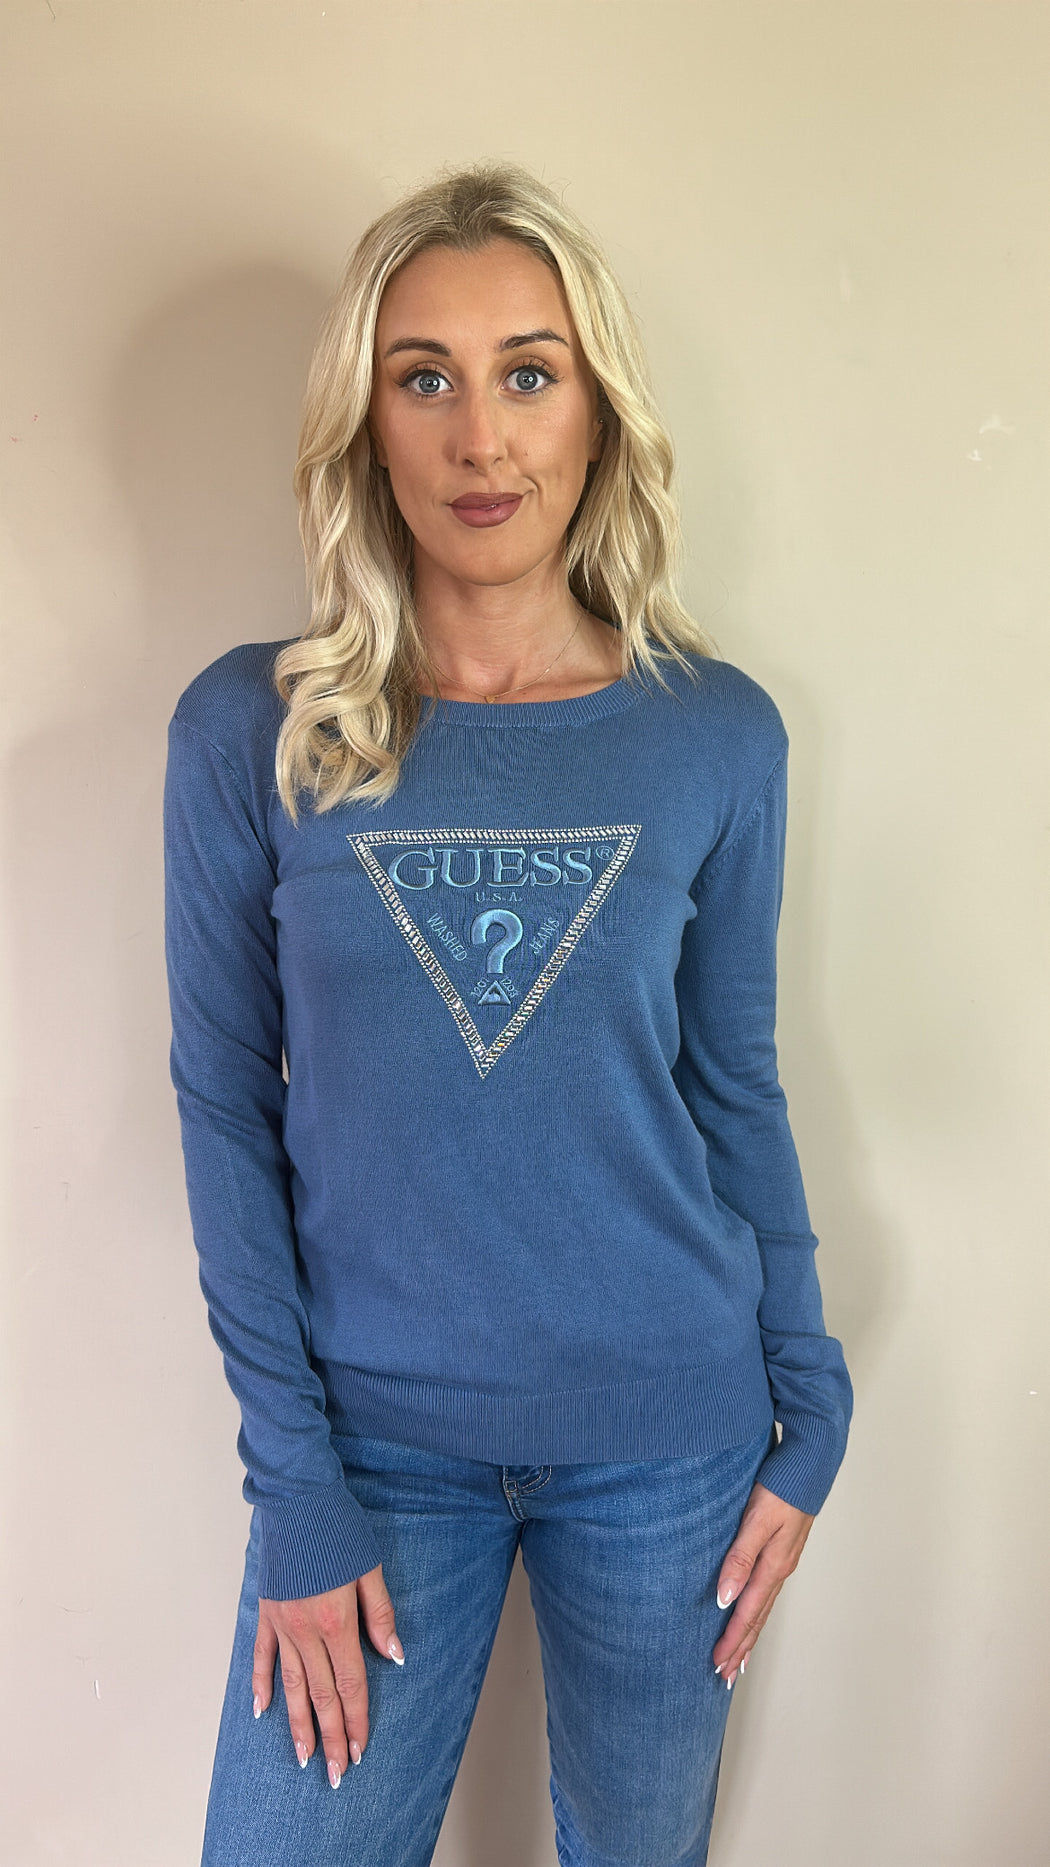 Guess blue triangle logo sweater